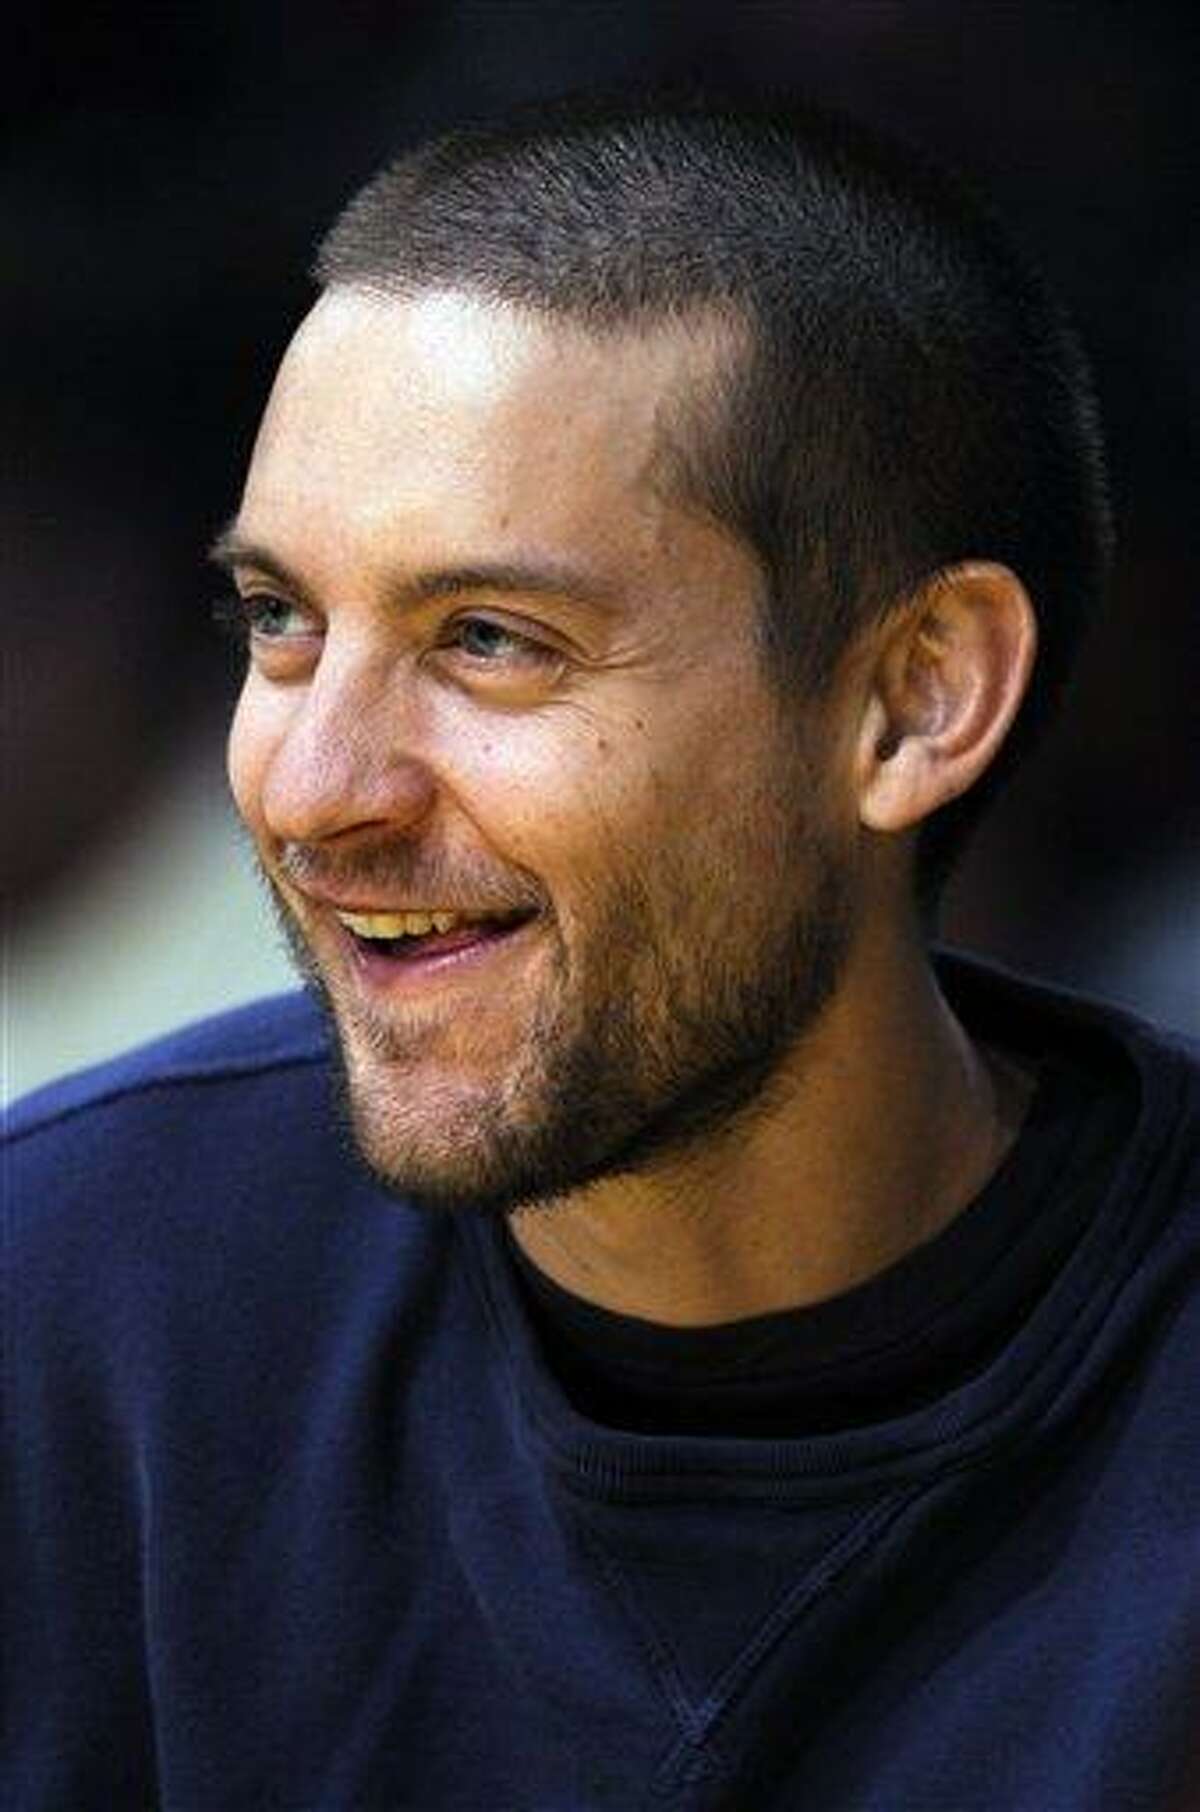 In this Feb. 28, 2008 file photo, actor Toby Maguire watches the Los Angeles Lakers and Miami Heat basketball game at the Staples Center in Los Angeles. The 34-year-old star of the web-slinging Spider-Man superhero franchise said Thursday, pre-production snags aren't dampening his mood about the fourth installment.